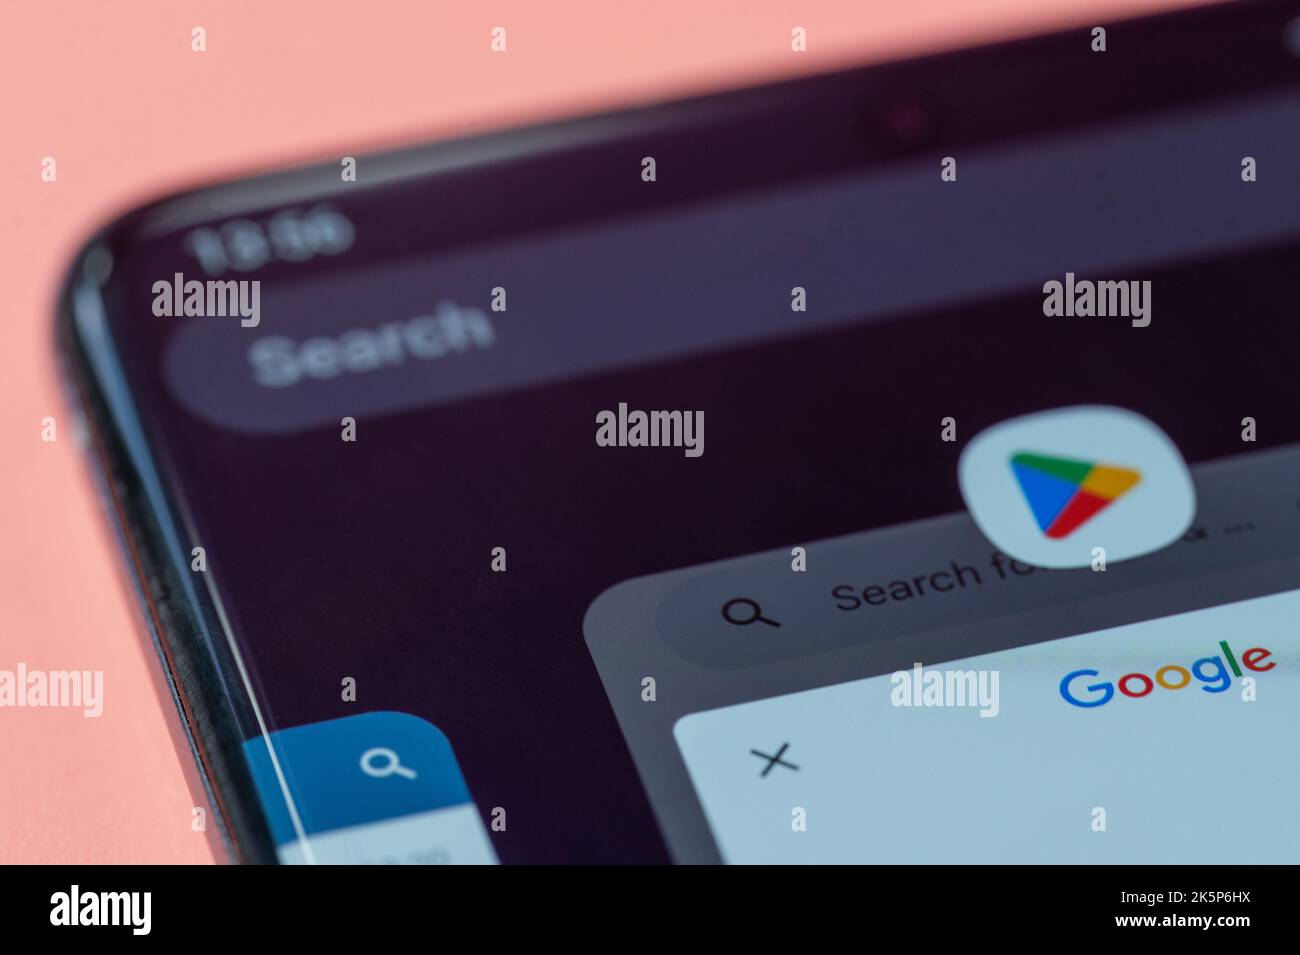 New york, USA - july 28, 2022: Search in google play store app in smartphone screen close up view Stock Photo